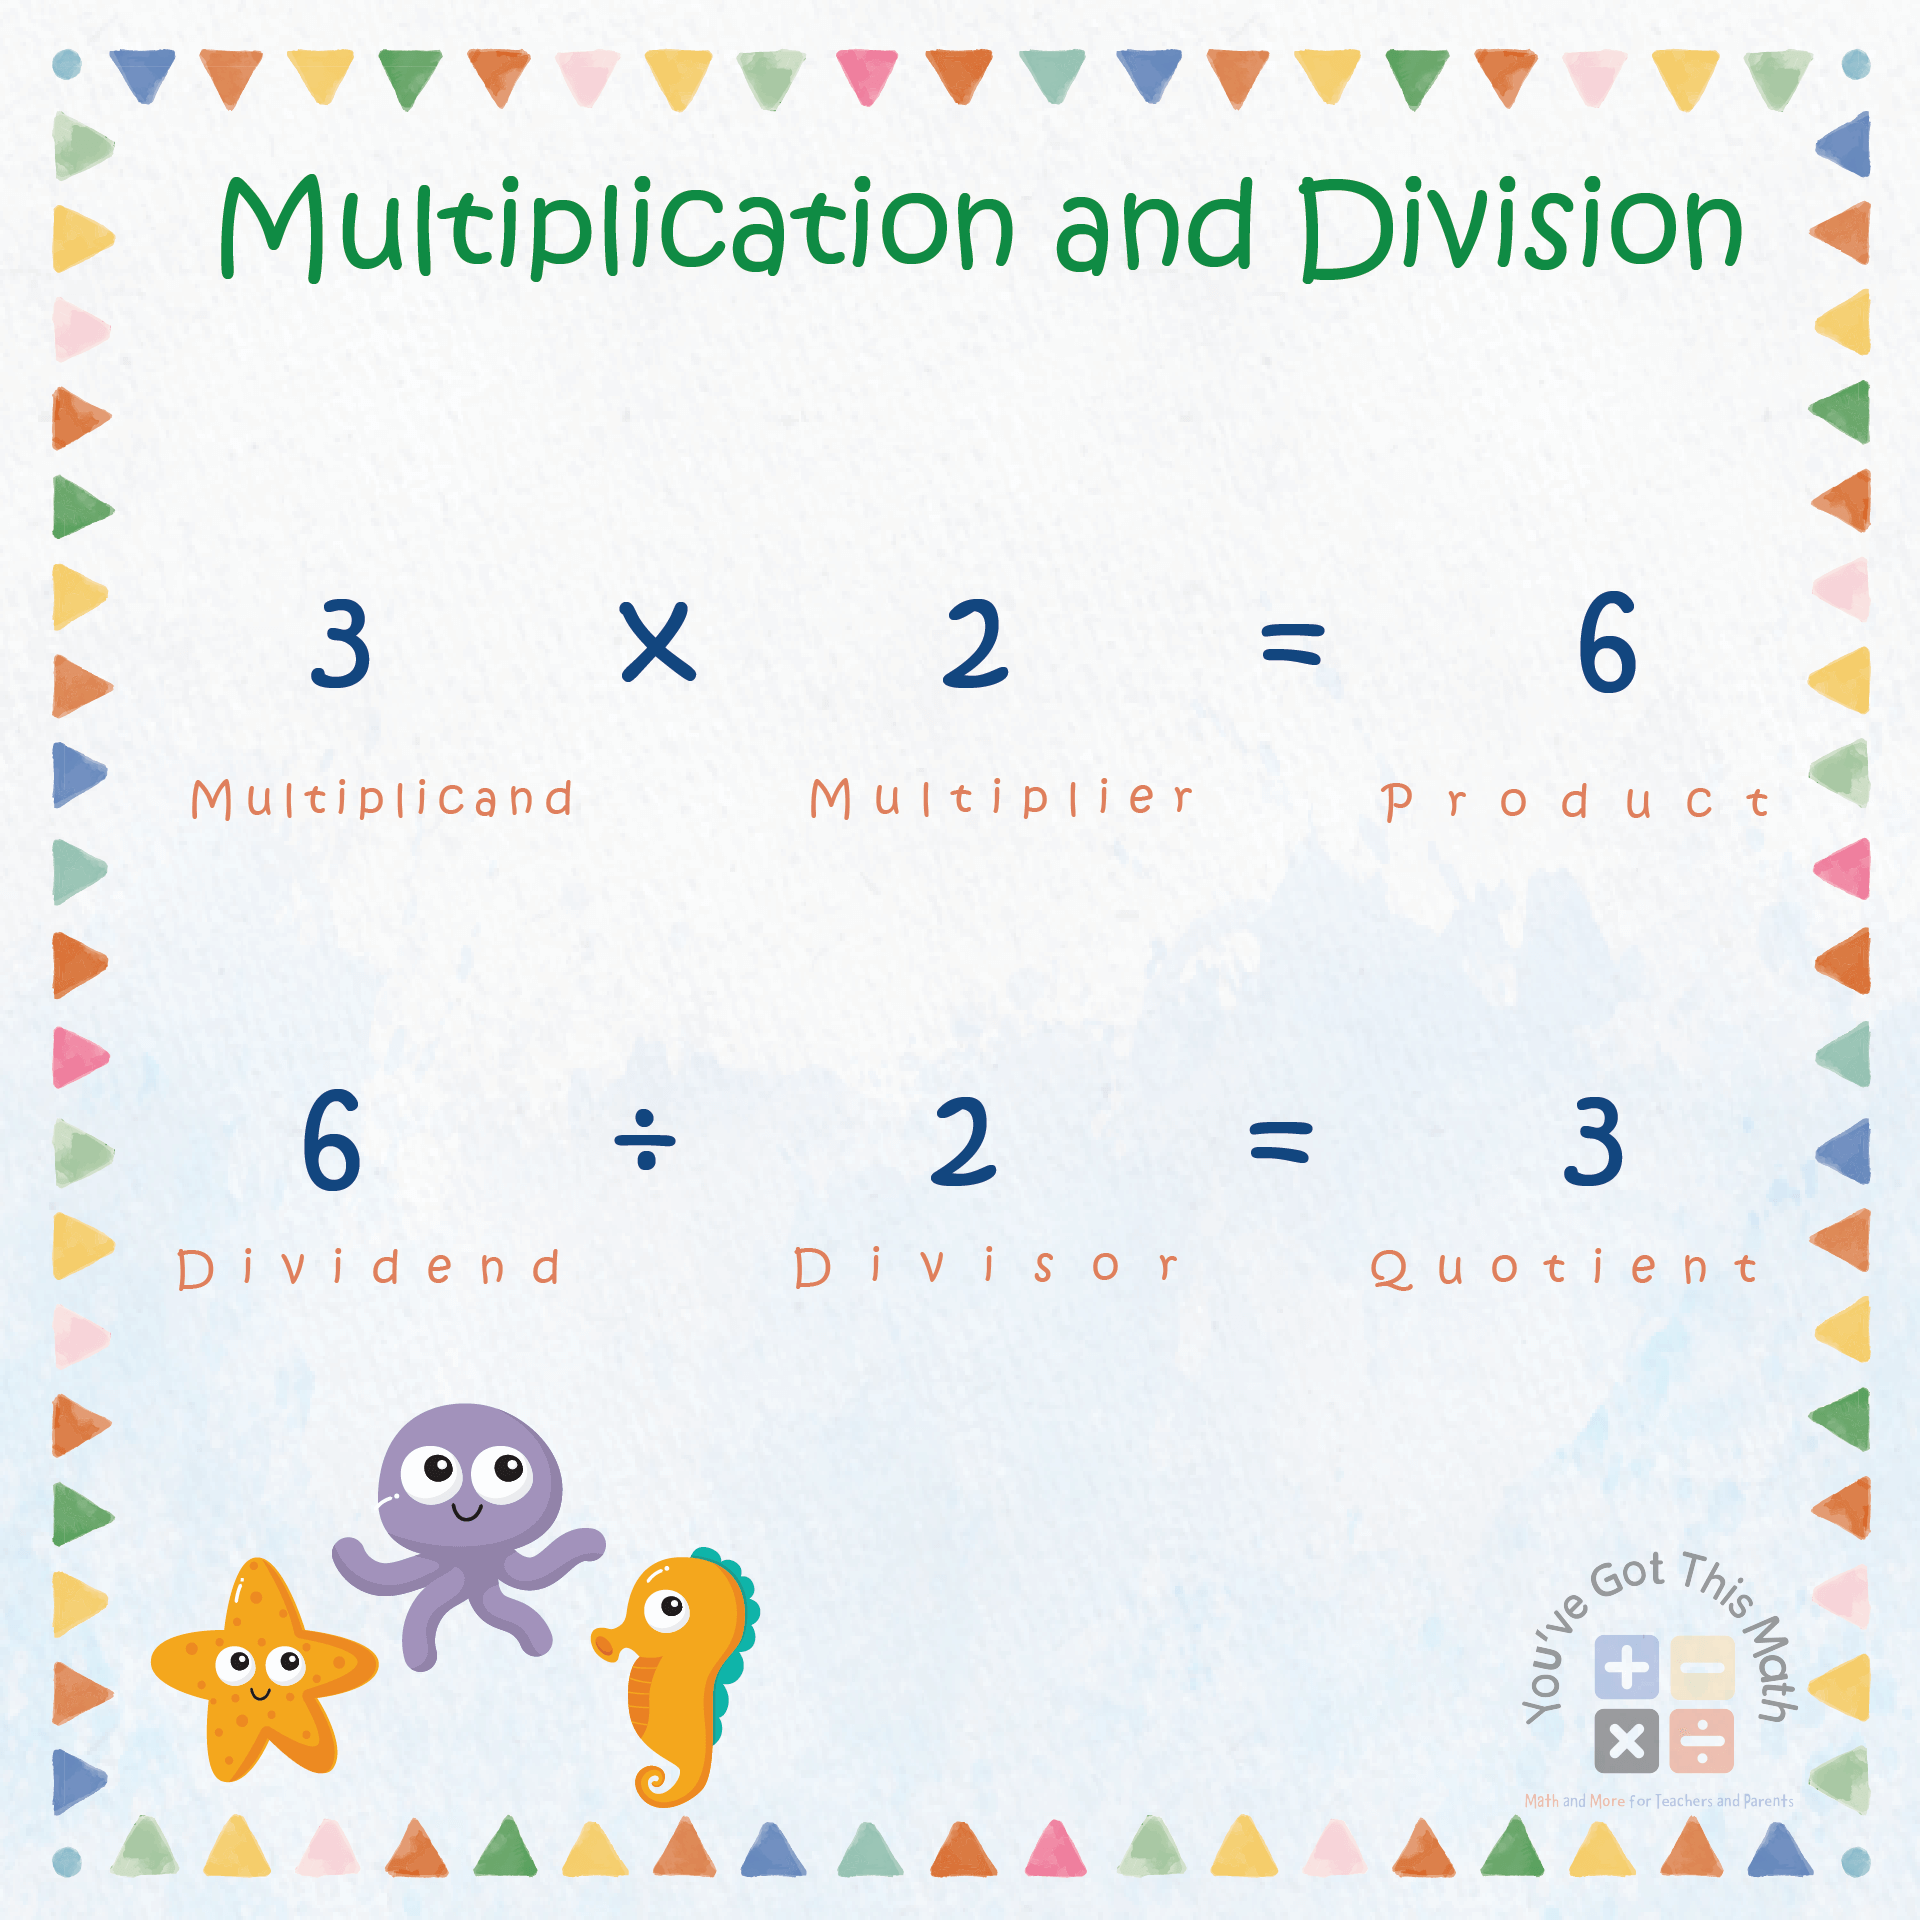 Explaining Multiplication and Division